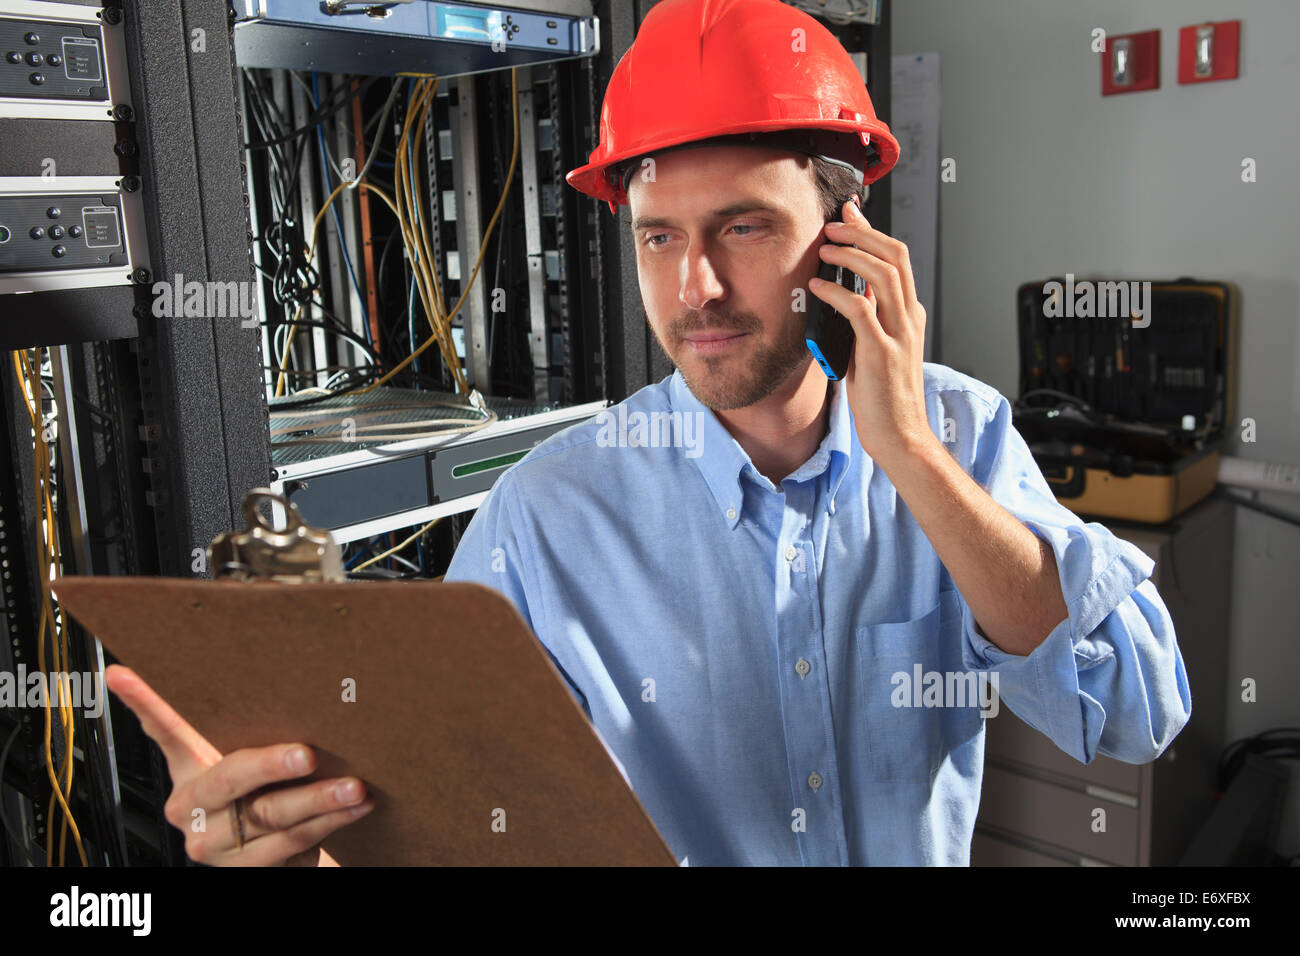 Network engineer on phone performing trouble shooting Stock Photo